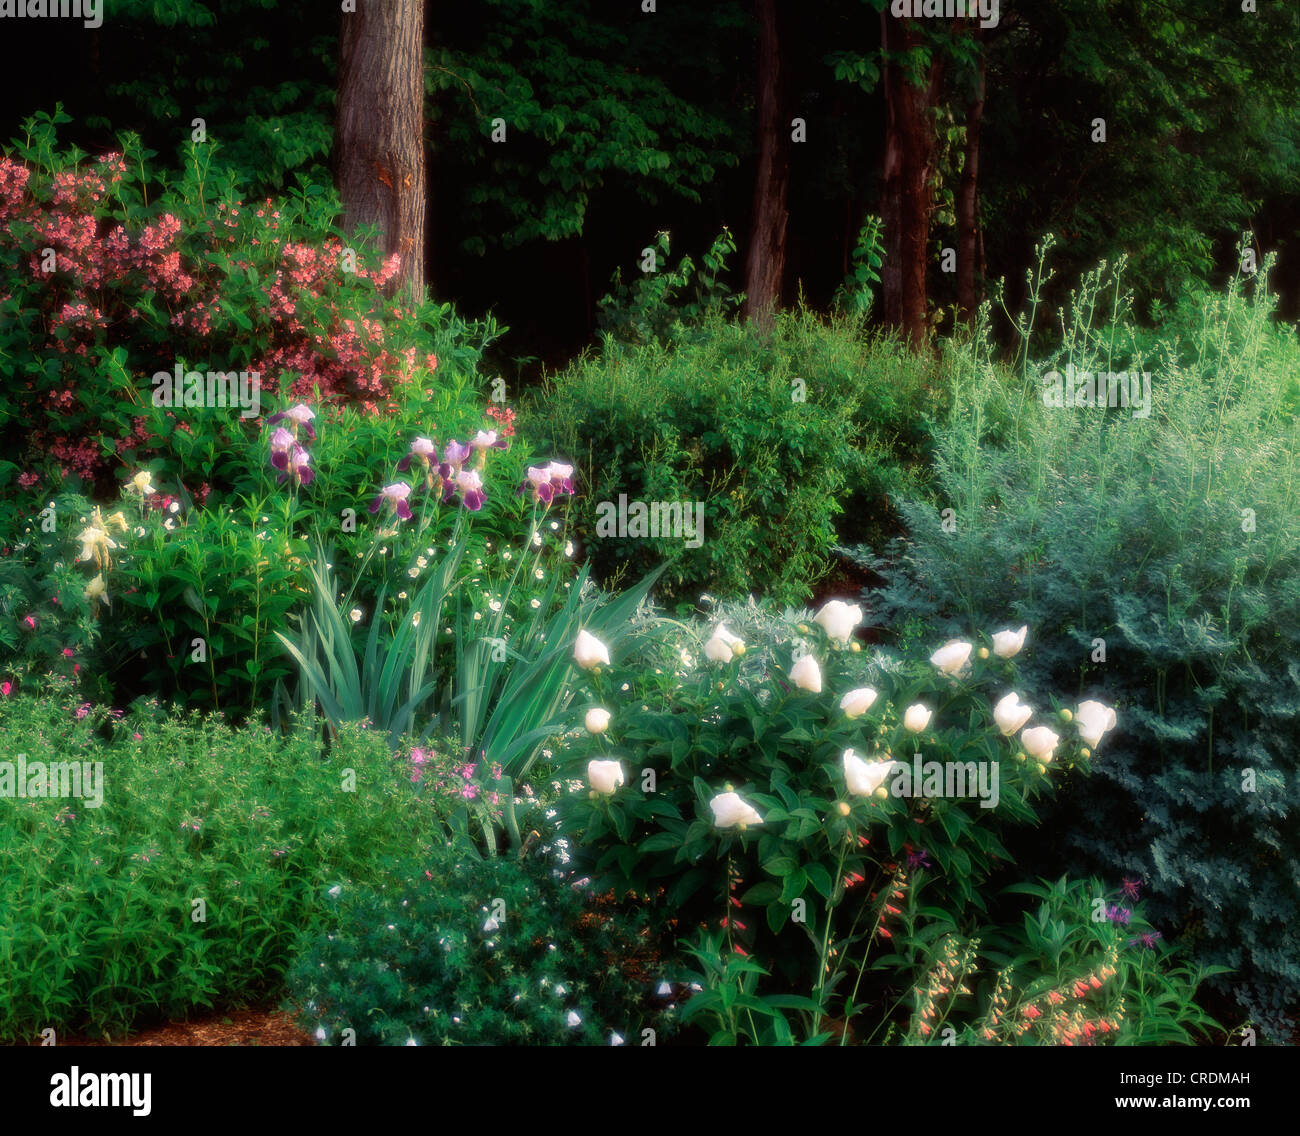 Naturalistic garden with Weigela, Peony 'Krinkled white', Iris and Meadow Rue Stock Photo